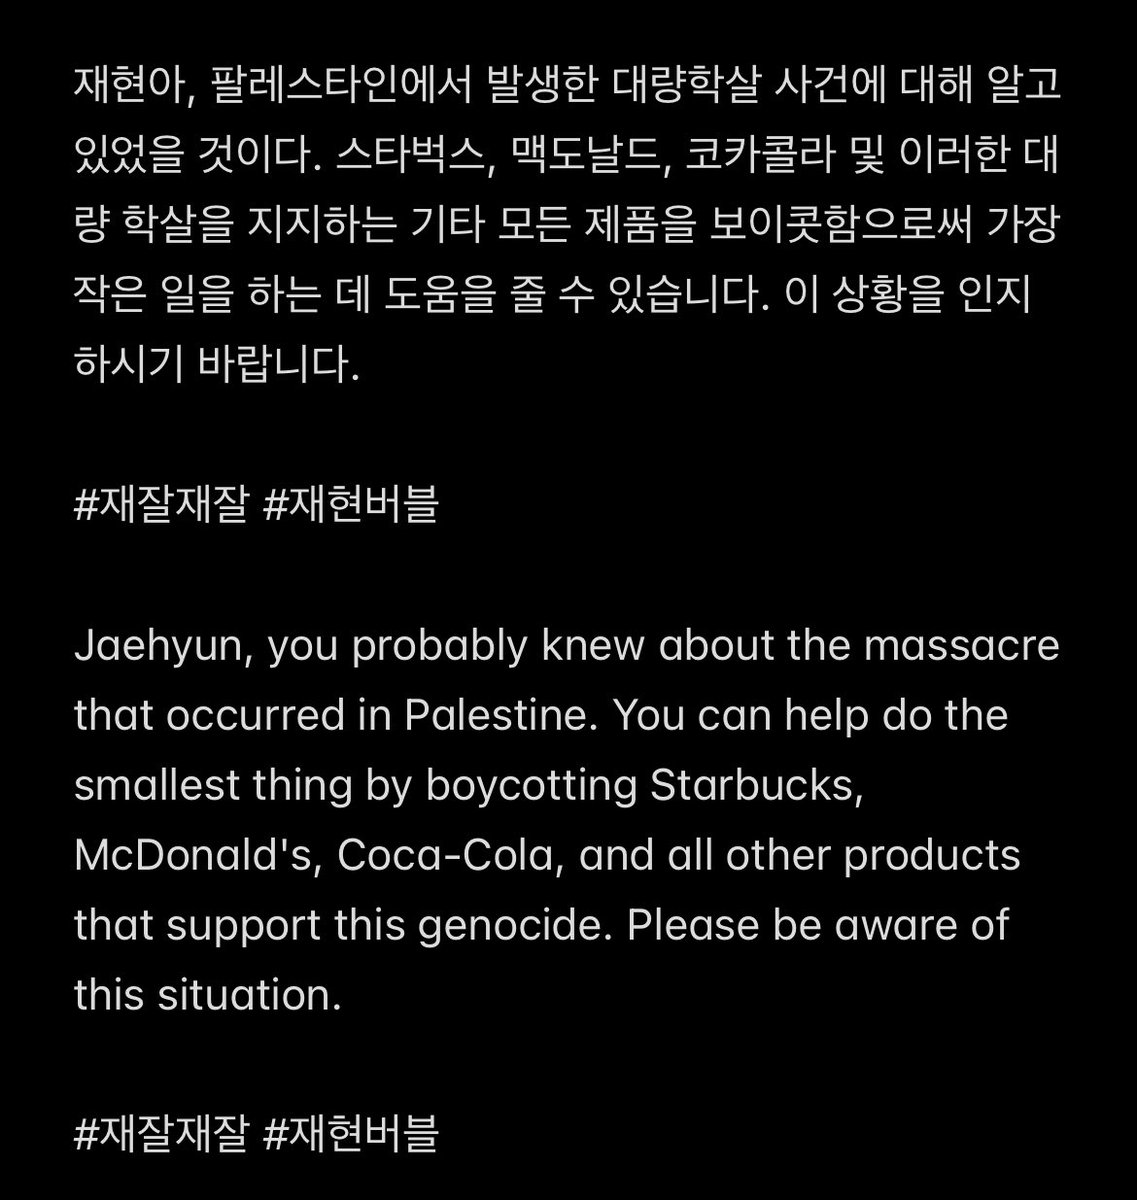 Jaehyun, you probably knew about the massacre that occurred in Palestine. You can help do the smallest thing by boycotting Starbucks, McDonald's, Coca-Cola, and all other products that support this genocide. Please be aware of this situation.

#재잘재잘 #재현버블